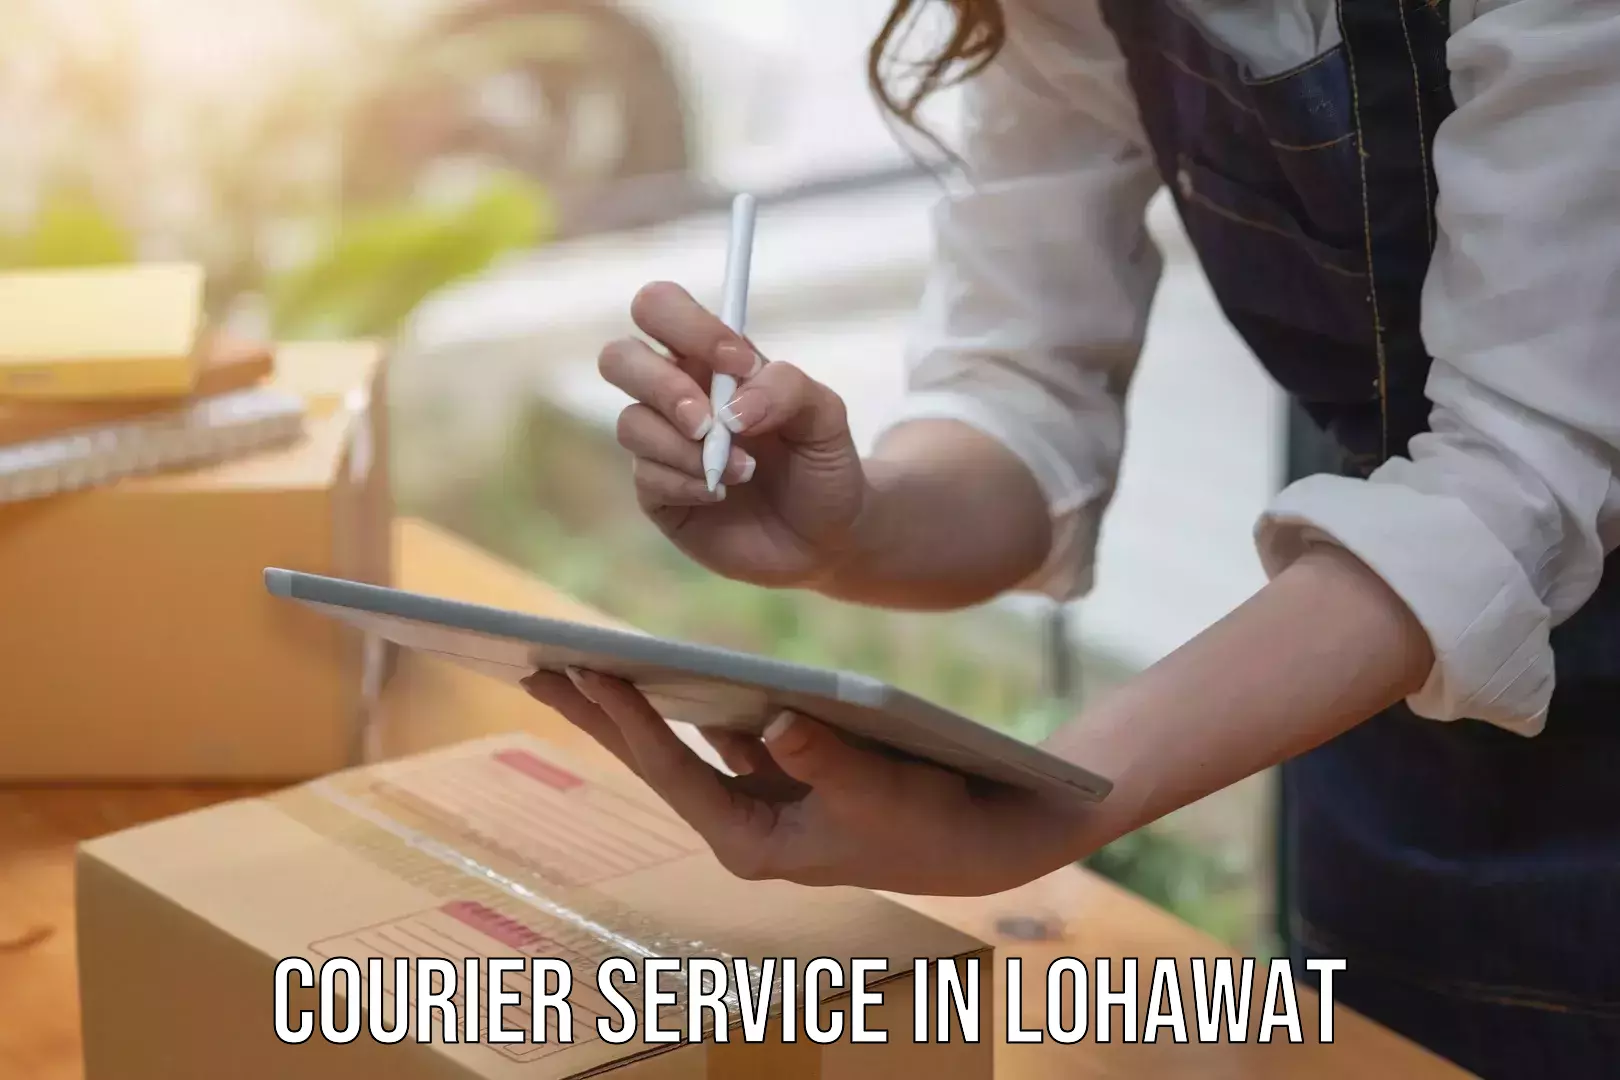 Flexible delivery schedules in Lohawat